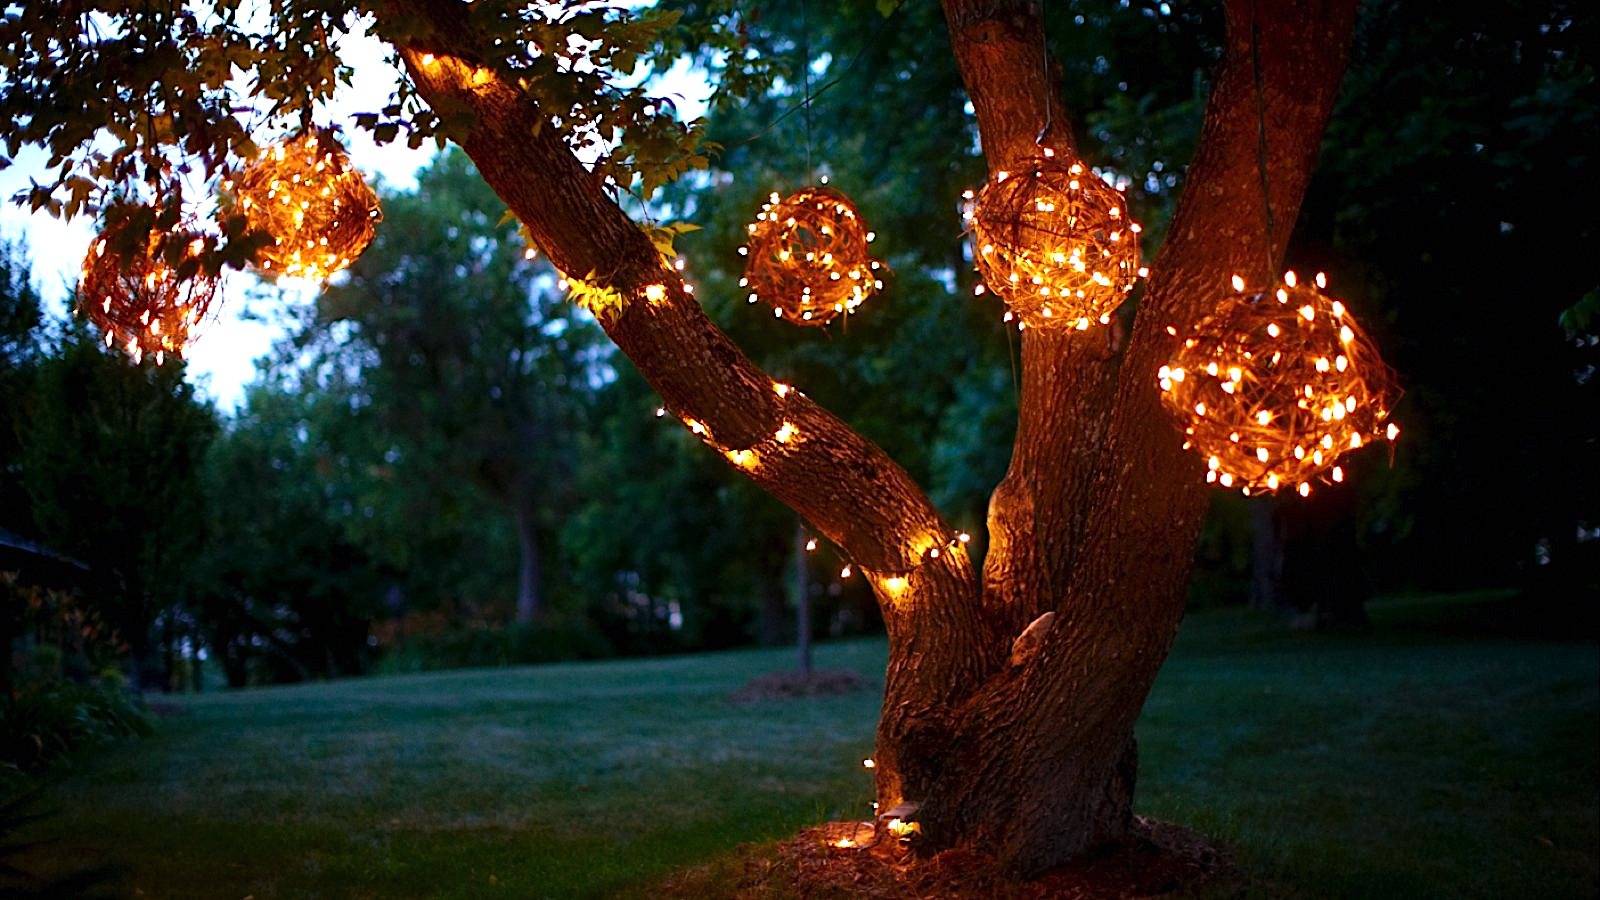 hanging grapevine balls from tree lit up at night